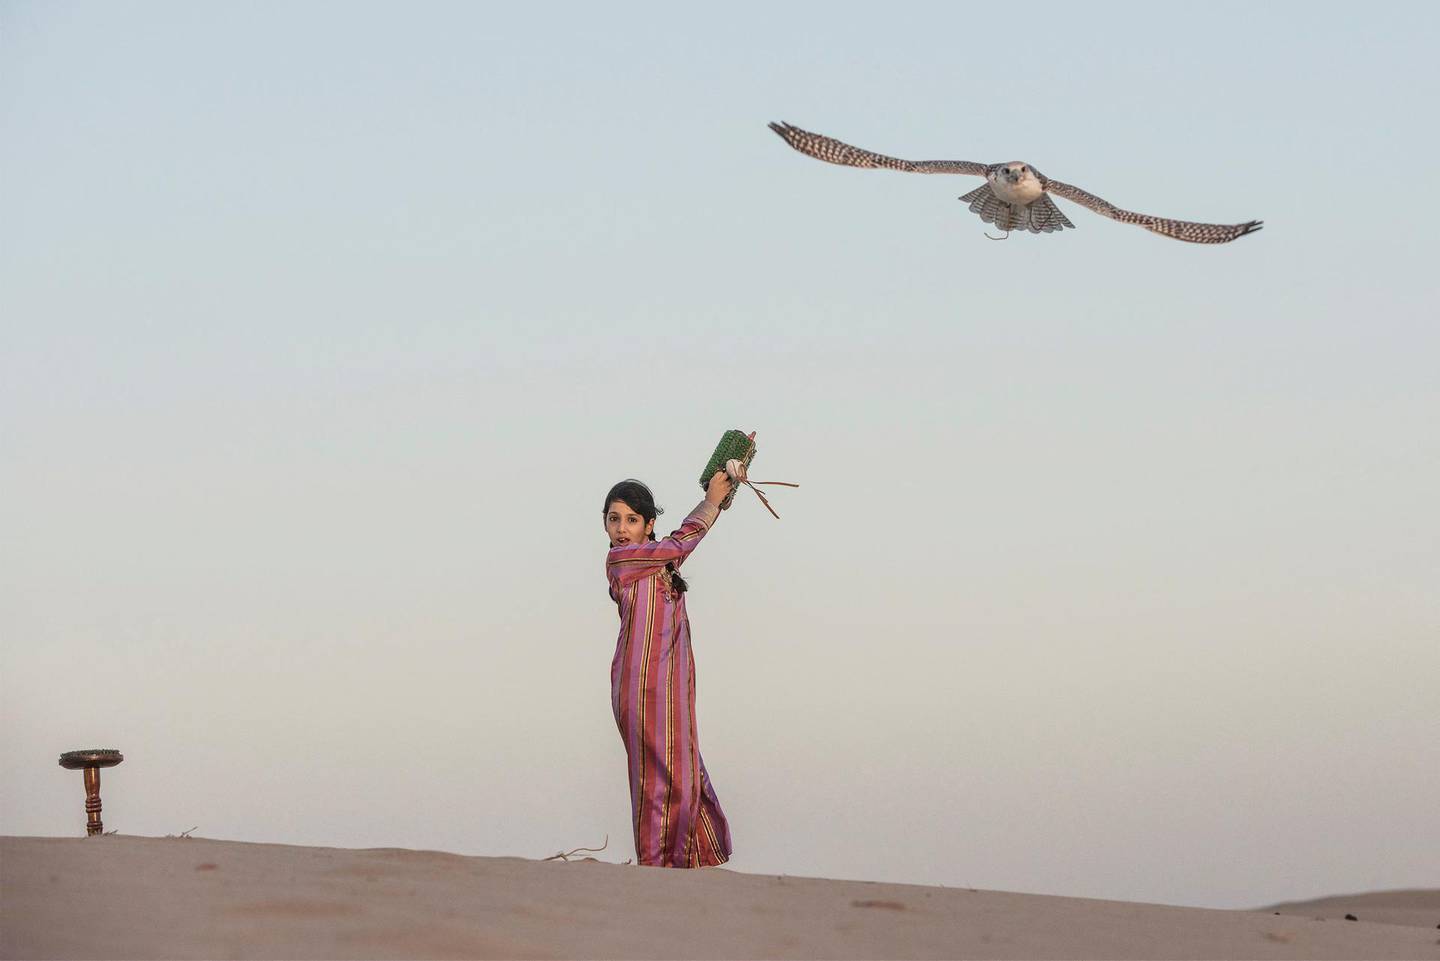 In the beautiful Abu Dhabi desert background this photograph show the young girl Osha breaking into male dominated sport and developing her skills in falconry. Vidhyaa Chandramohan for The National